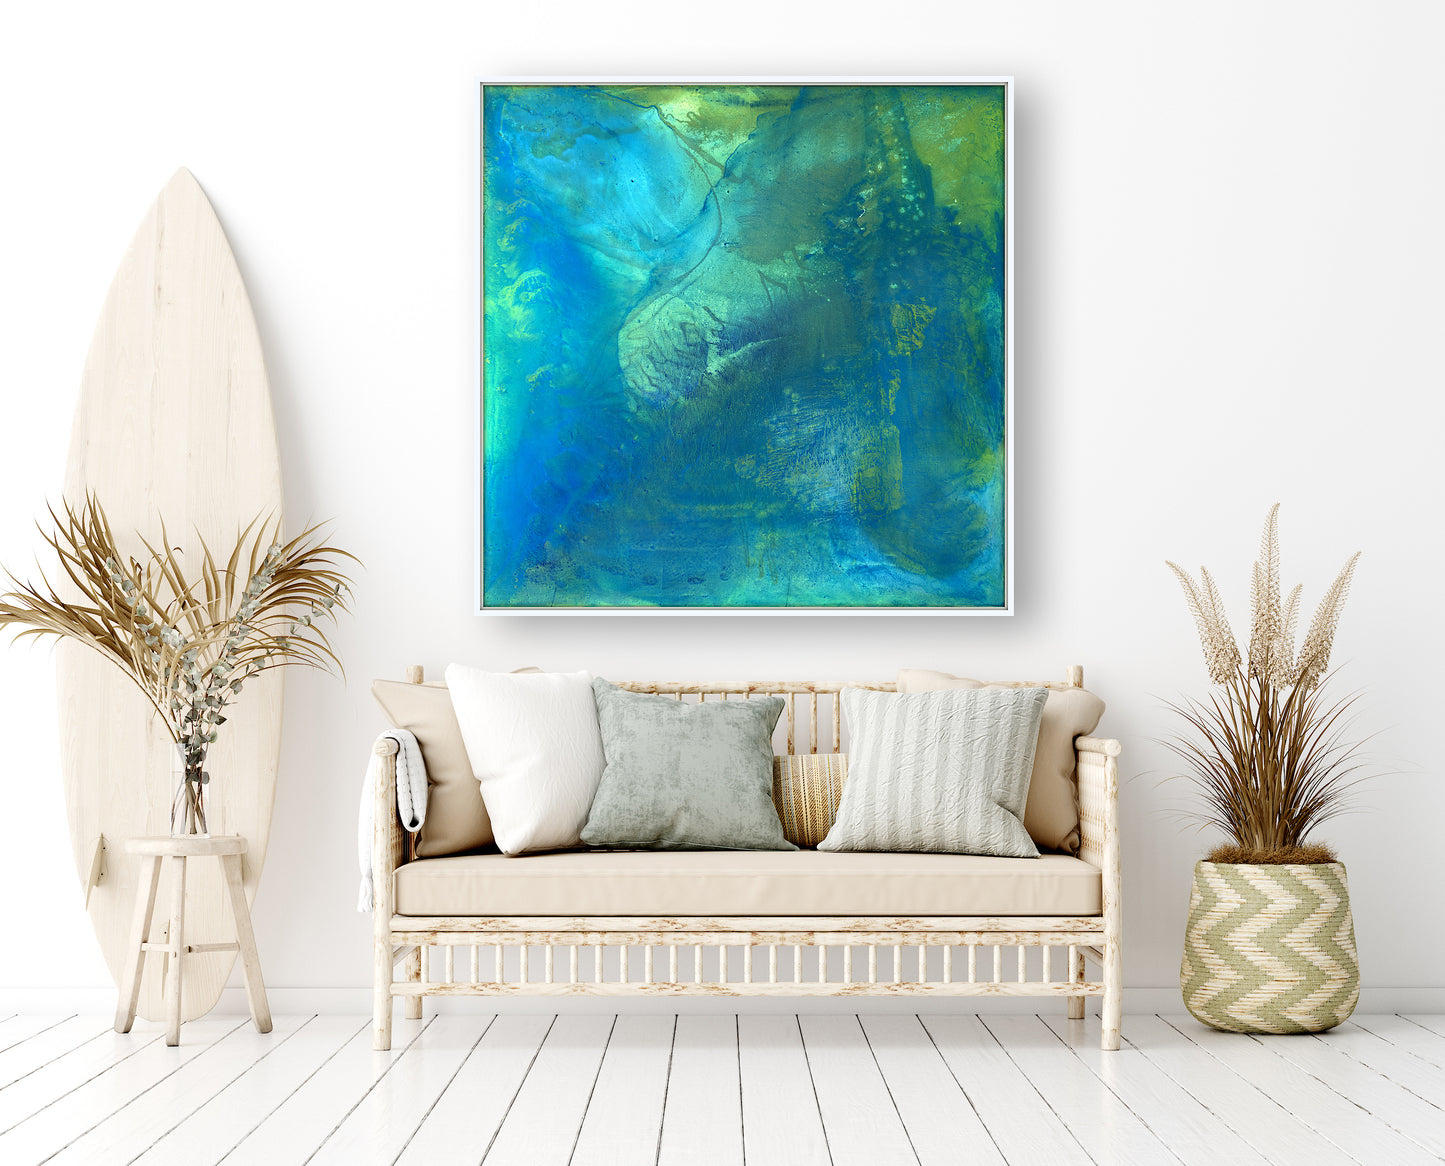 Submarine | Giclee Print on Gallery-Wrapped Stretched Canvas